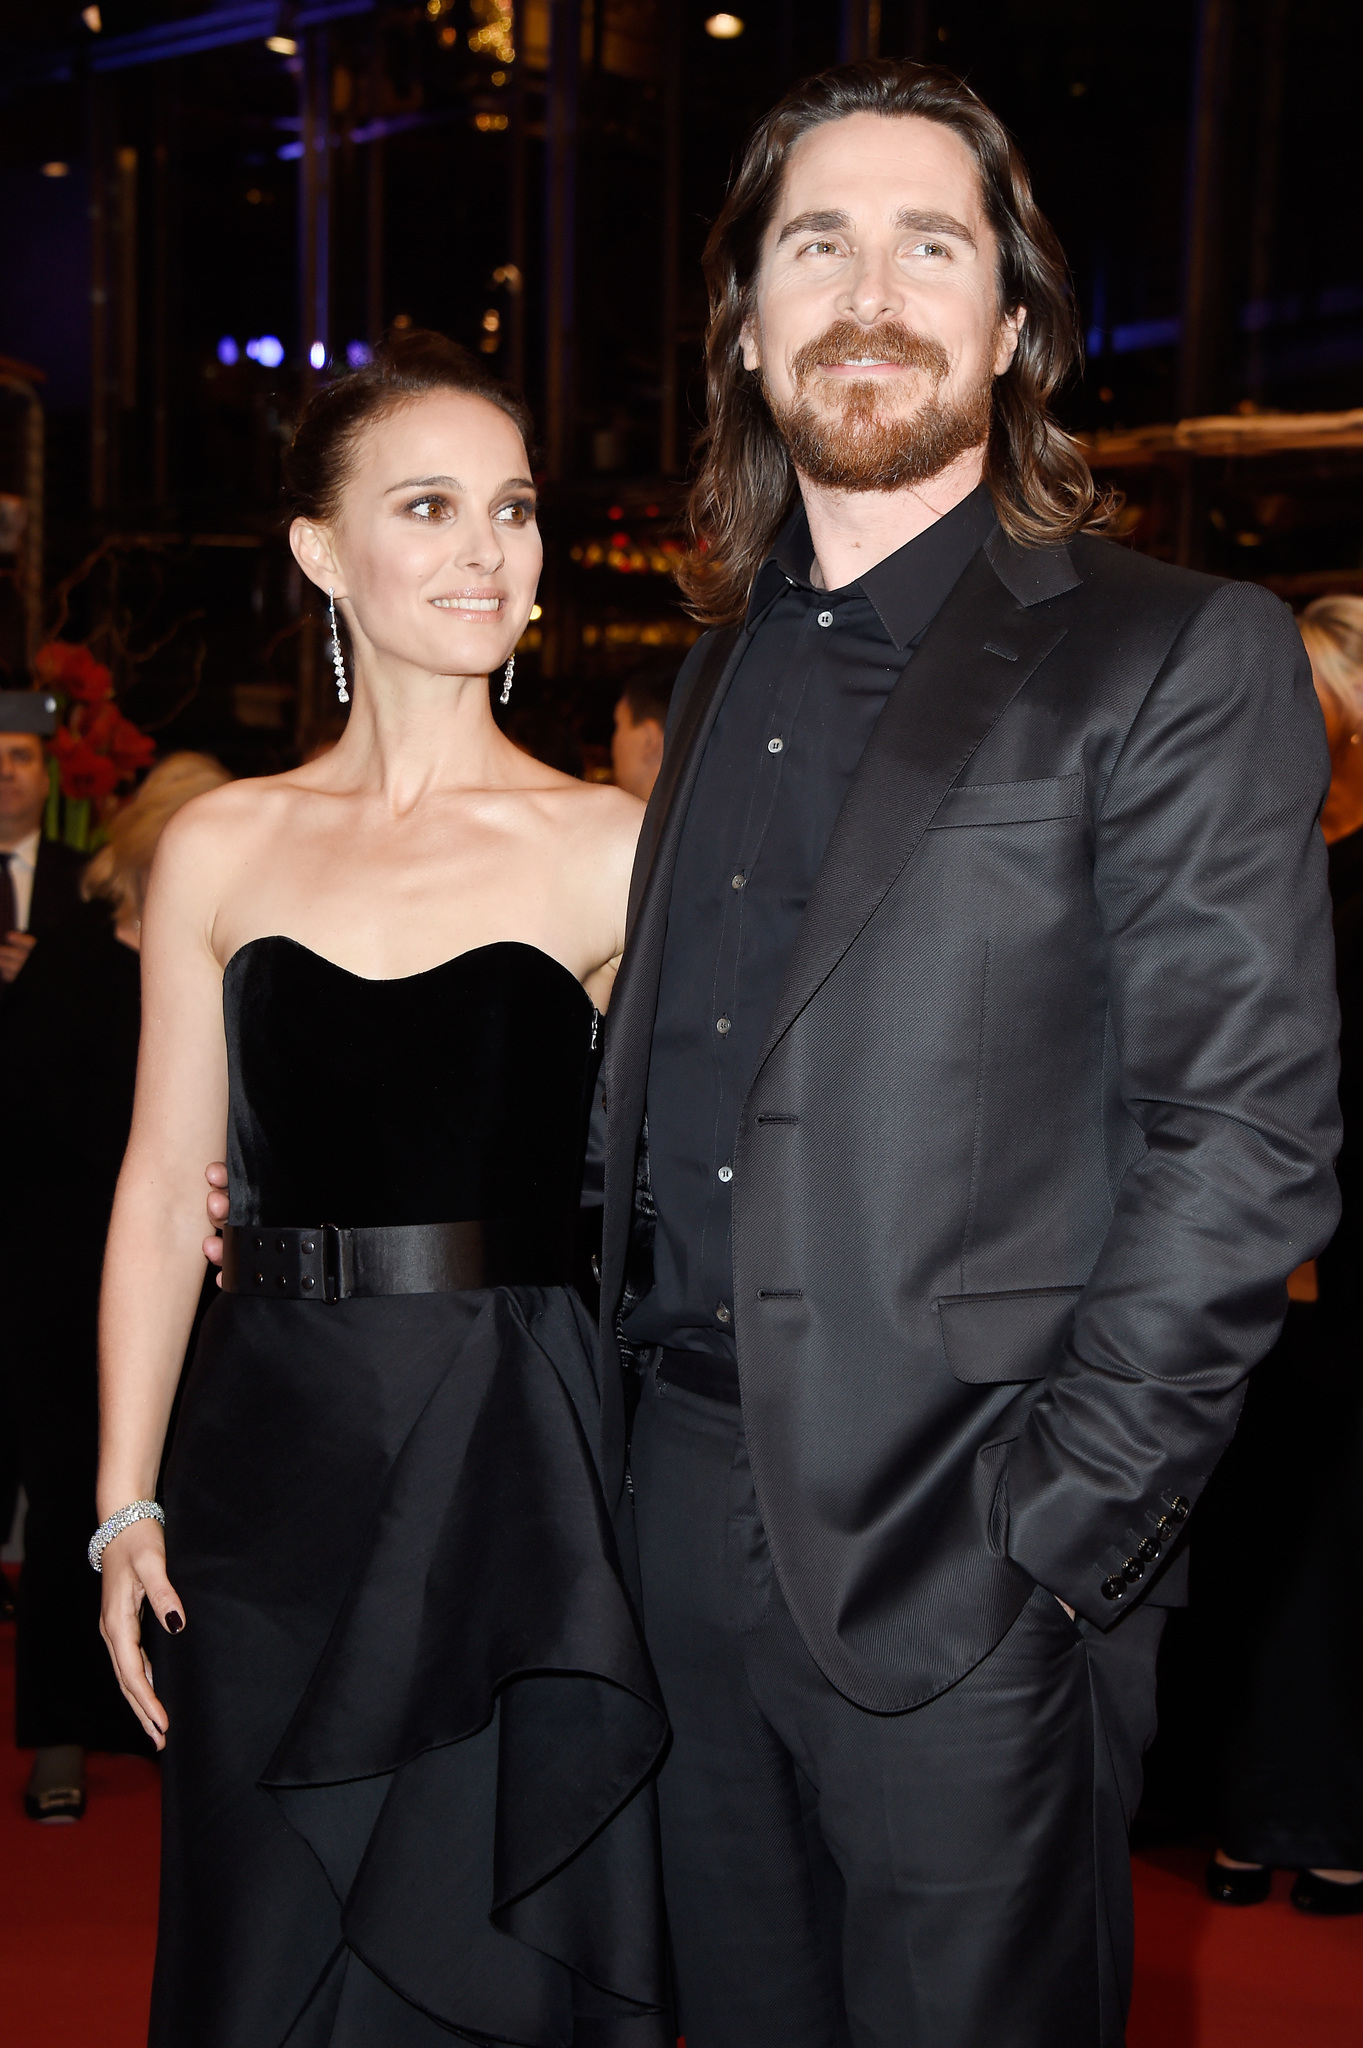 Natalie Portman and Christian Bale at event of Knight of Cups (2015)